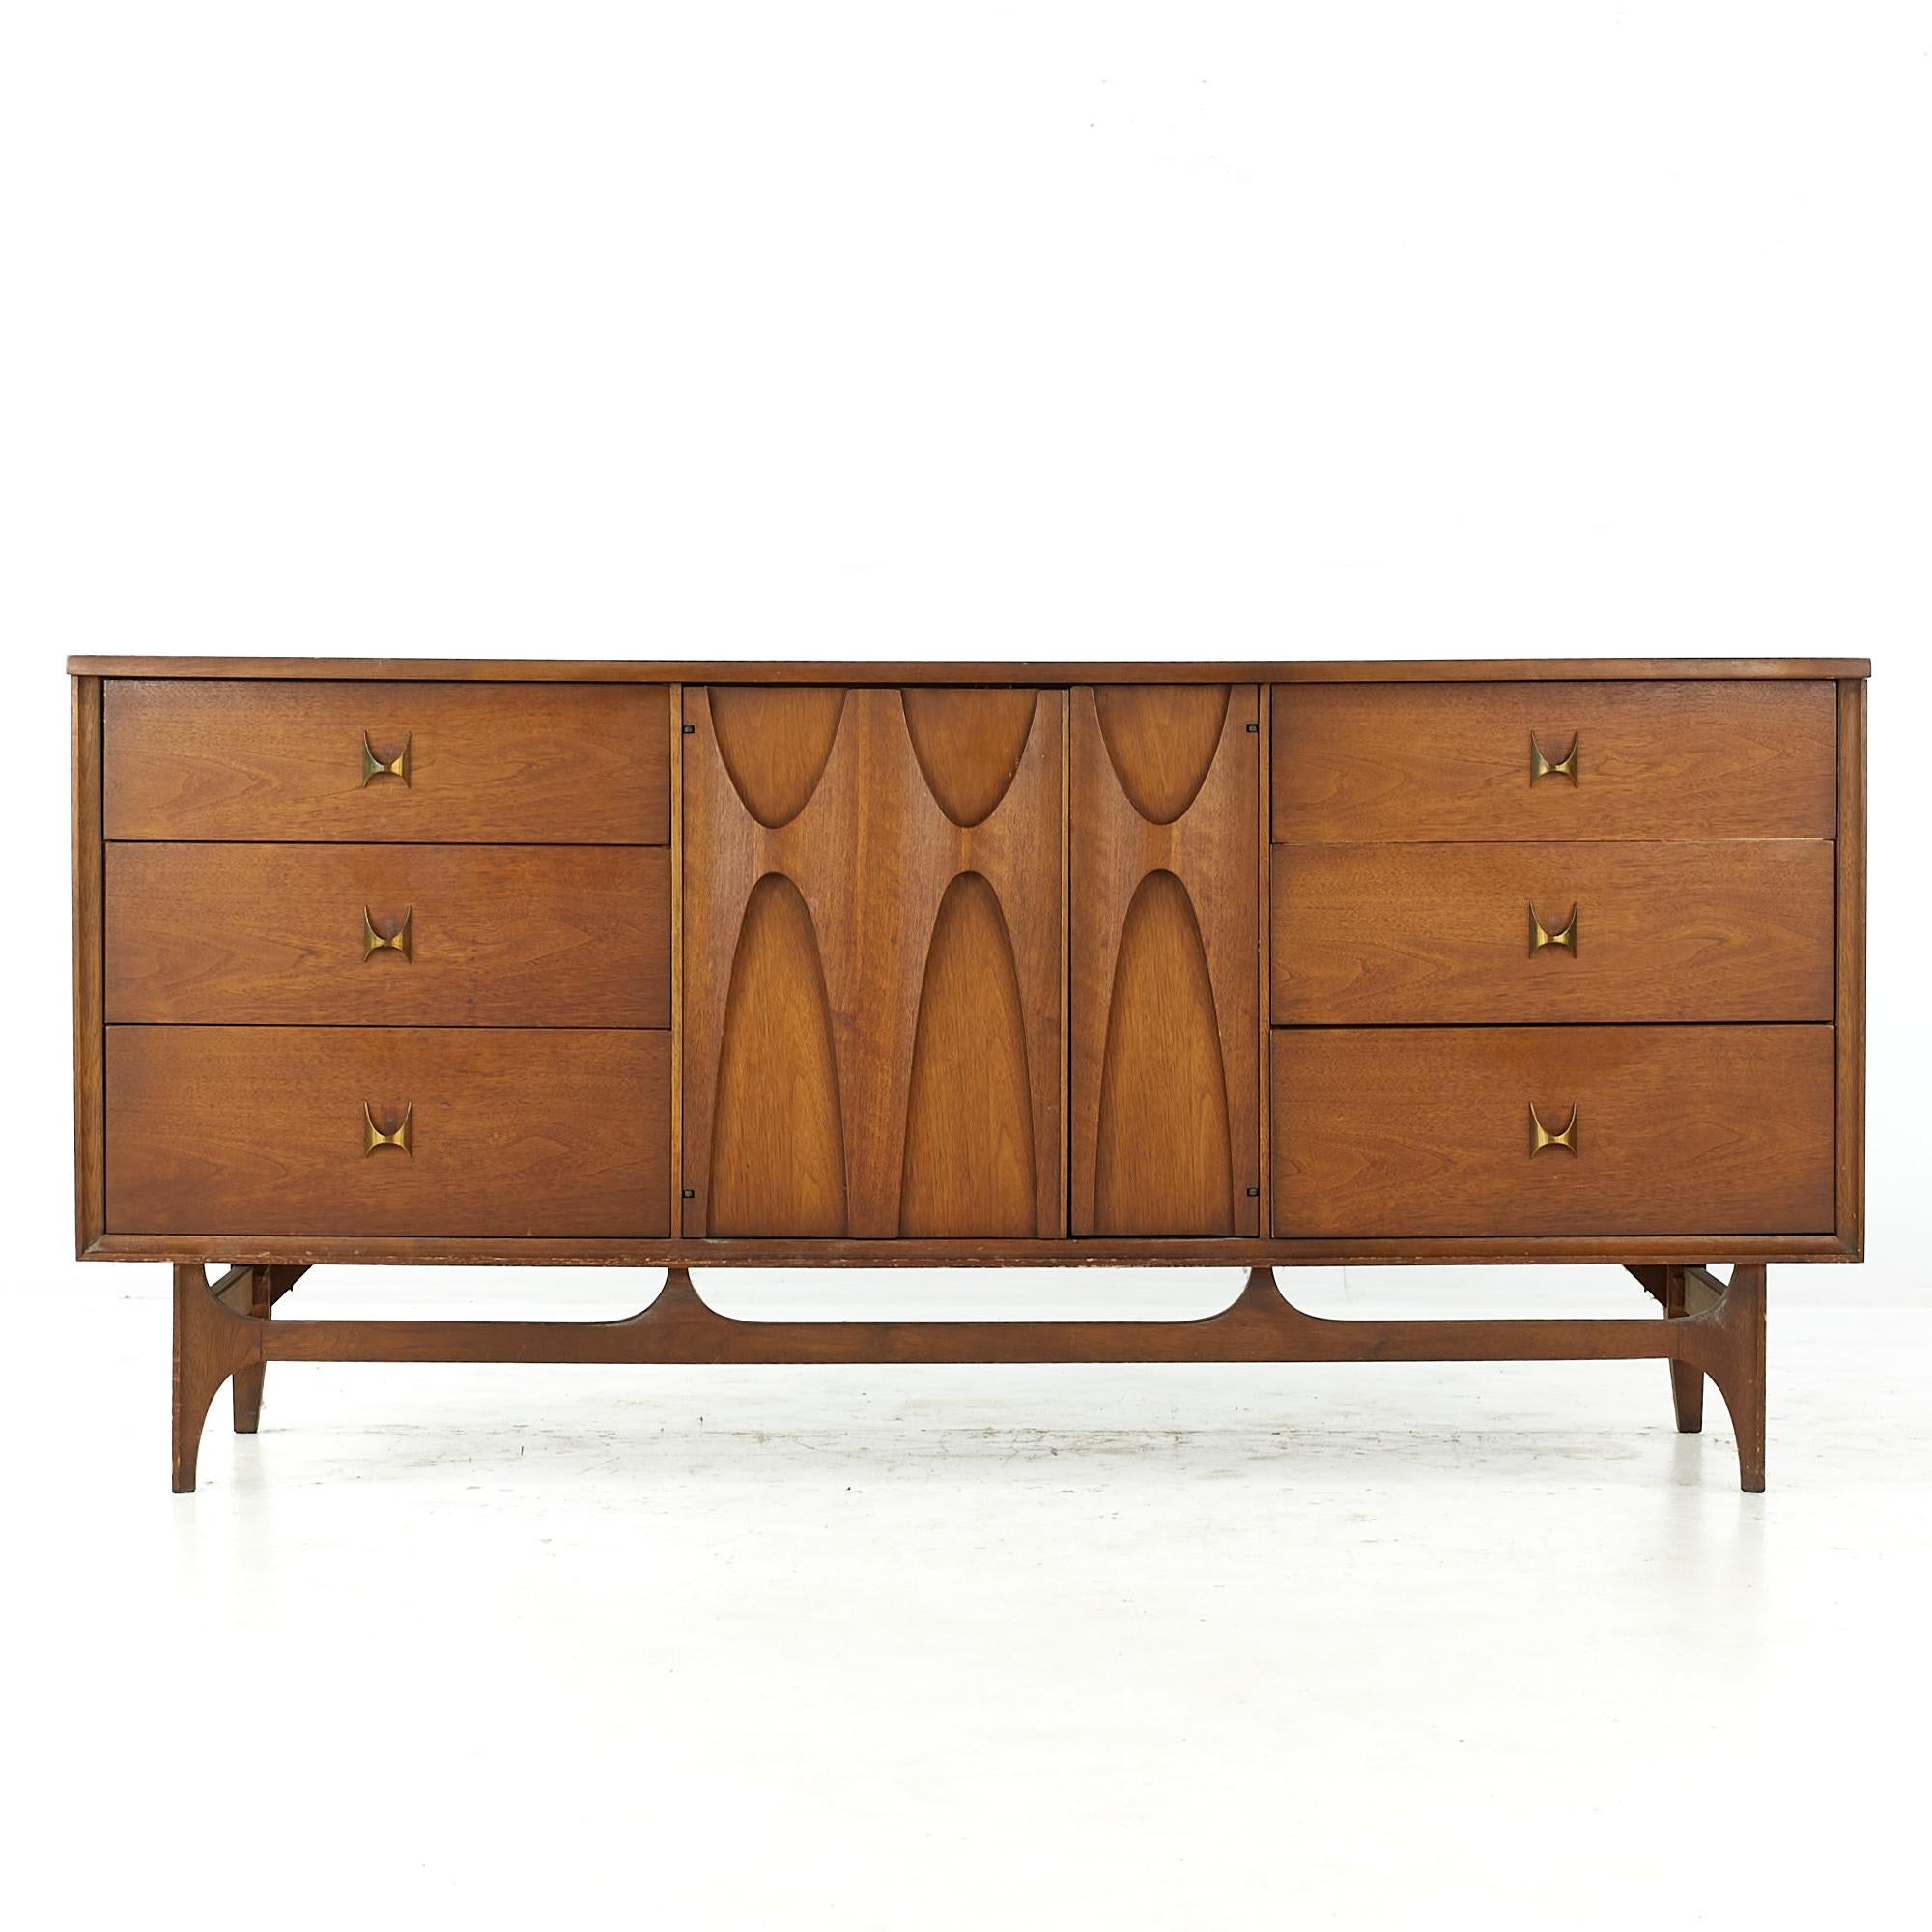 Broyhill Brasilia Mid Century walnut 9 drawer dresser

This dresser measures: 66 wide x 19 deep x 30.75 inches high

All pieces of furniture can be had in what we call restored vintage condition. That means the piece is restored upon purchase so